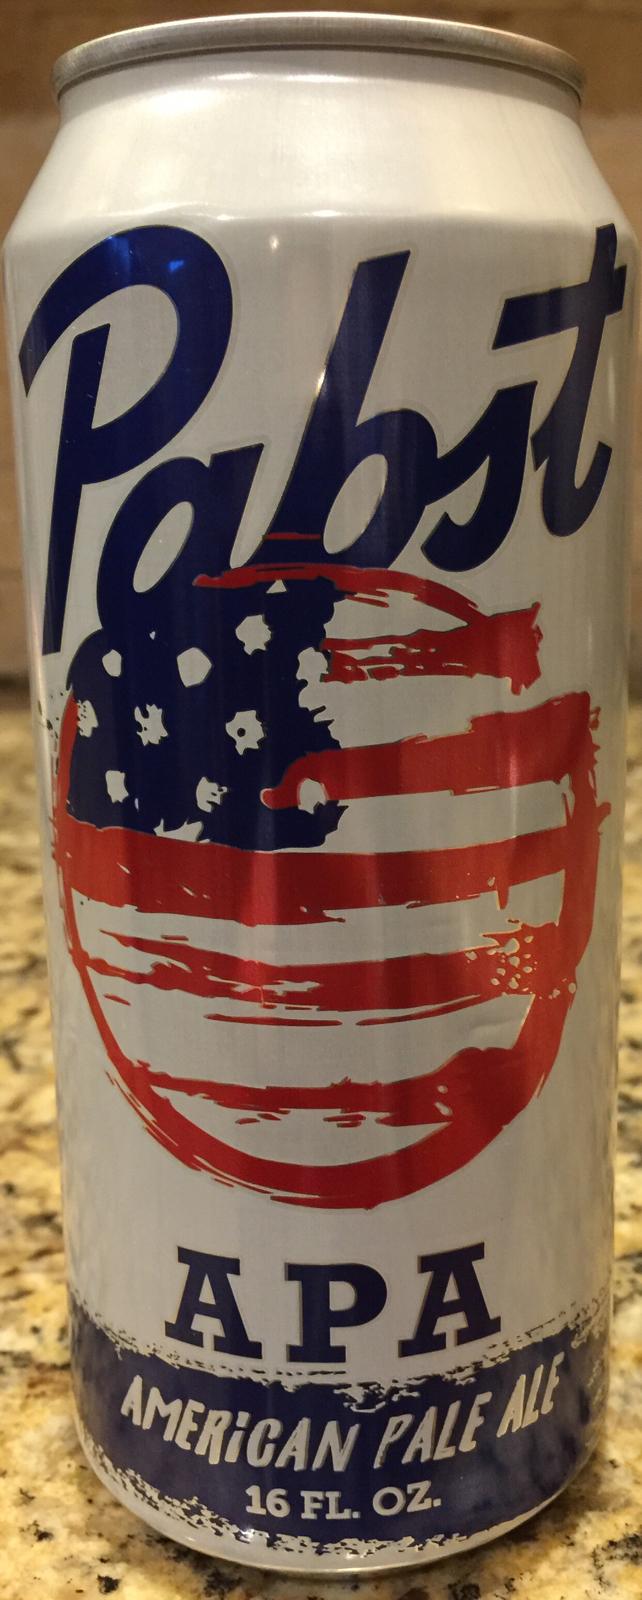 Pabst American Pale Ale